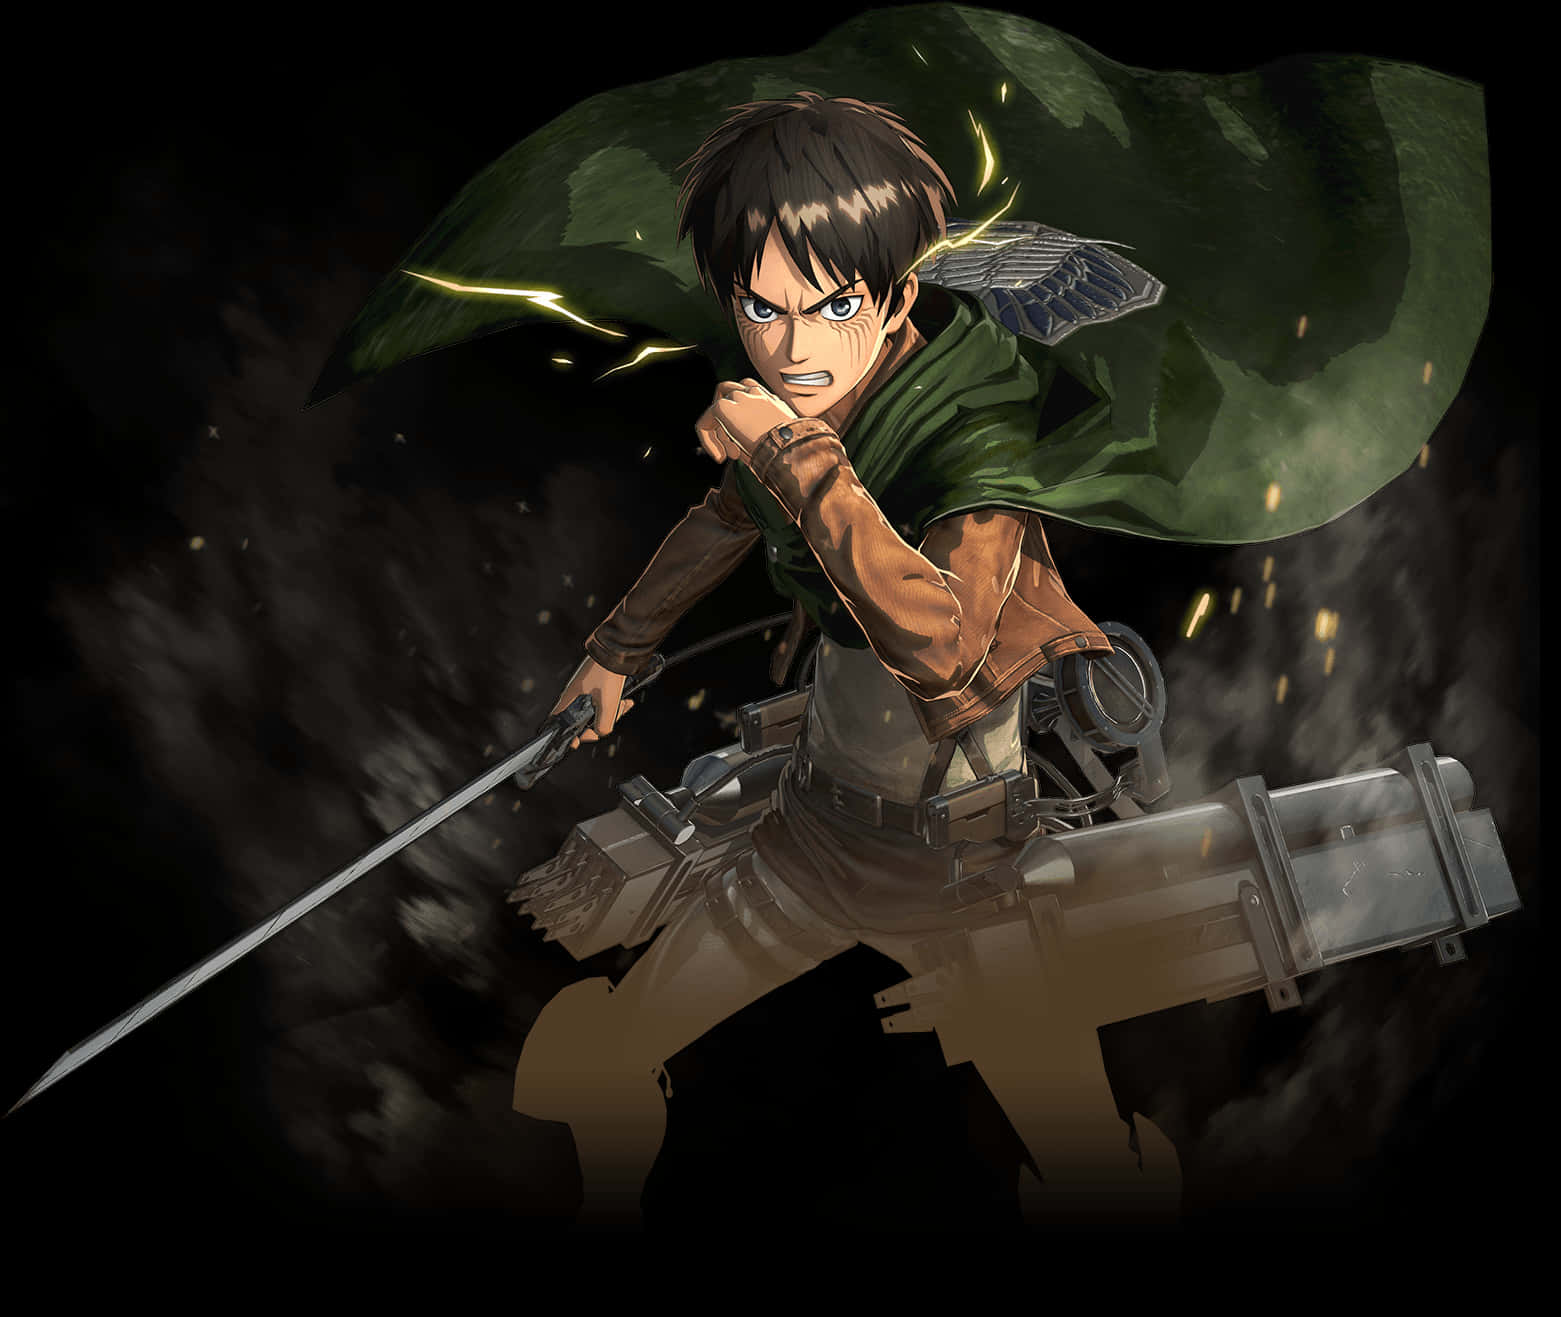 Attack on Titan - Humanity's Last Stand